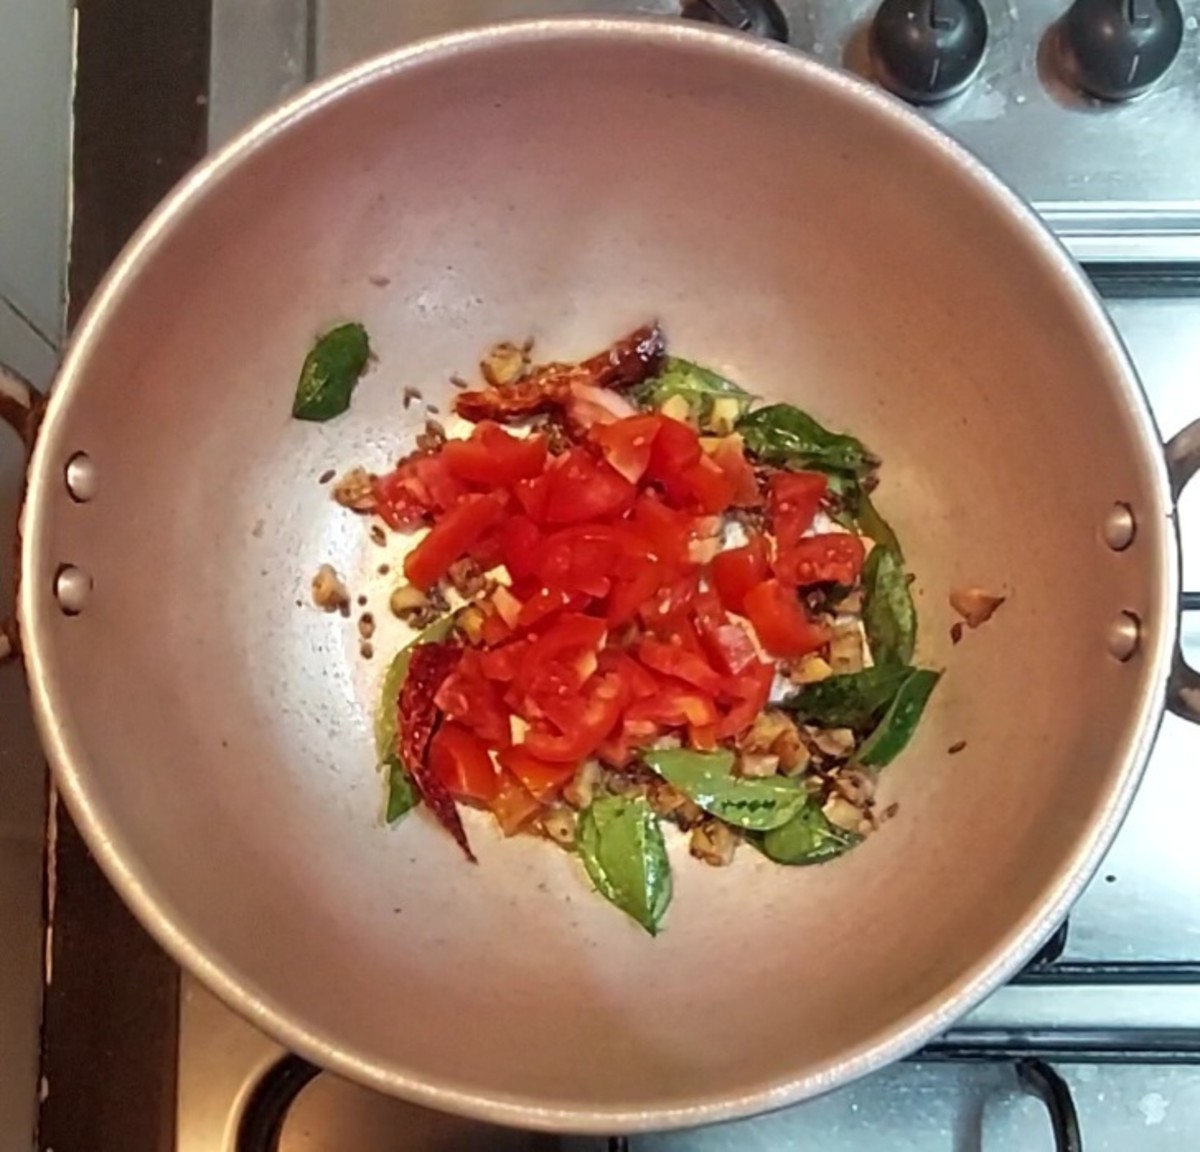 Add 1-2 chopped tomatoes, saute for 1-2 minutes.